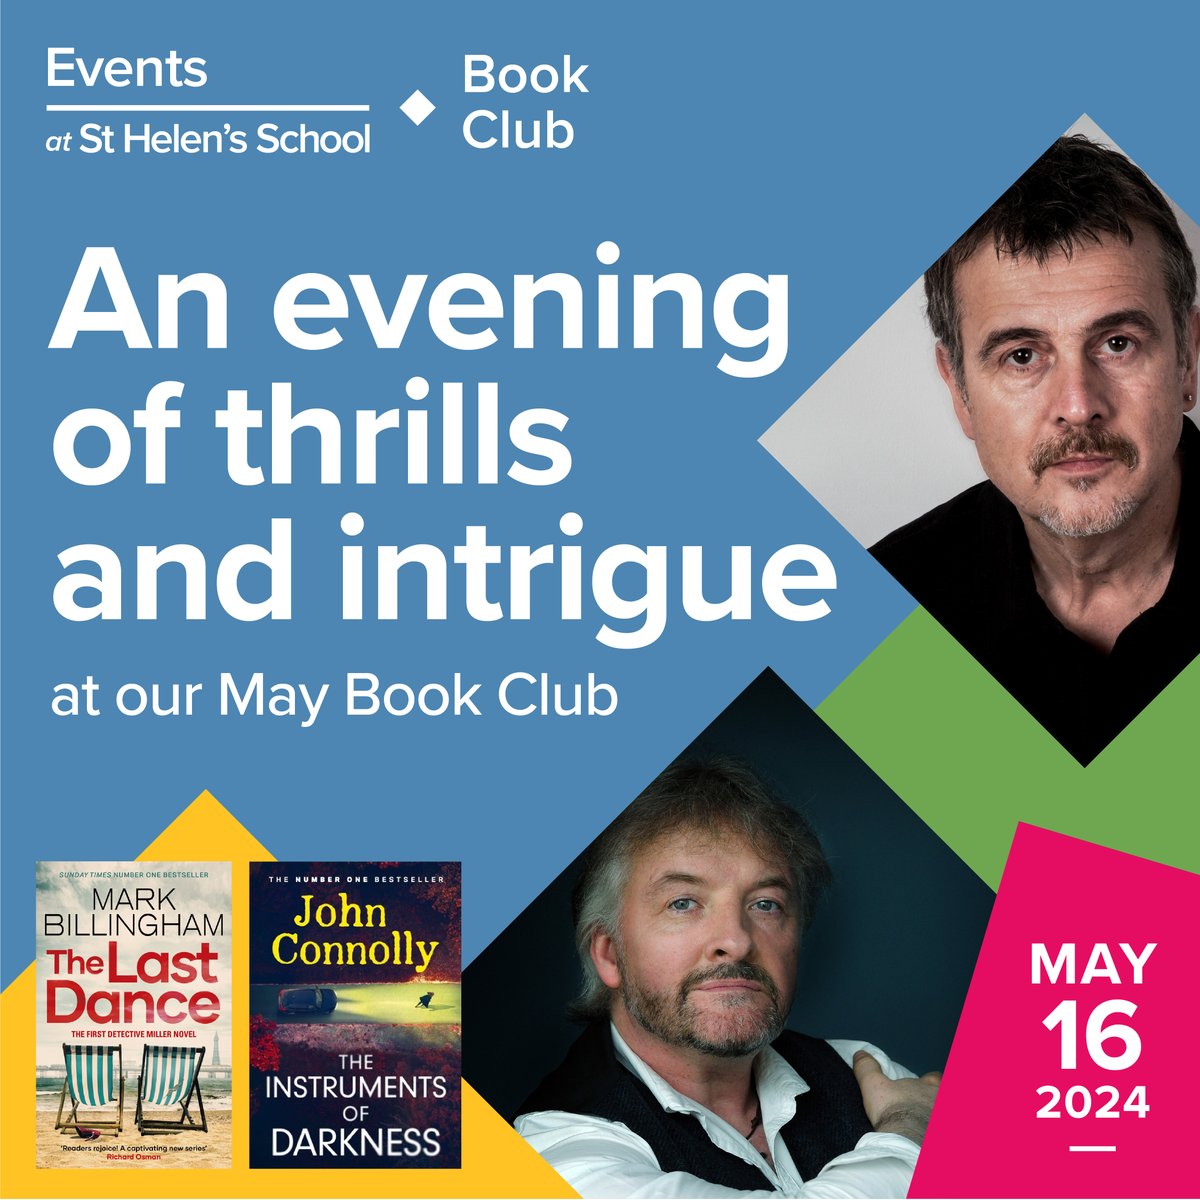 Join John Connolly and Mark Billingham at our Book Club!

Tickets and info: ow.ly/AeUO50RtloU

#BookClub